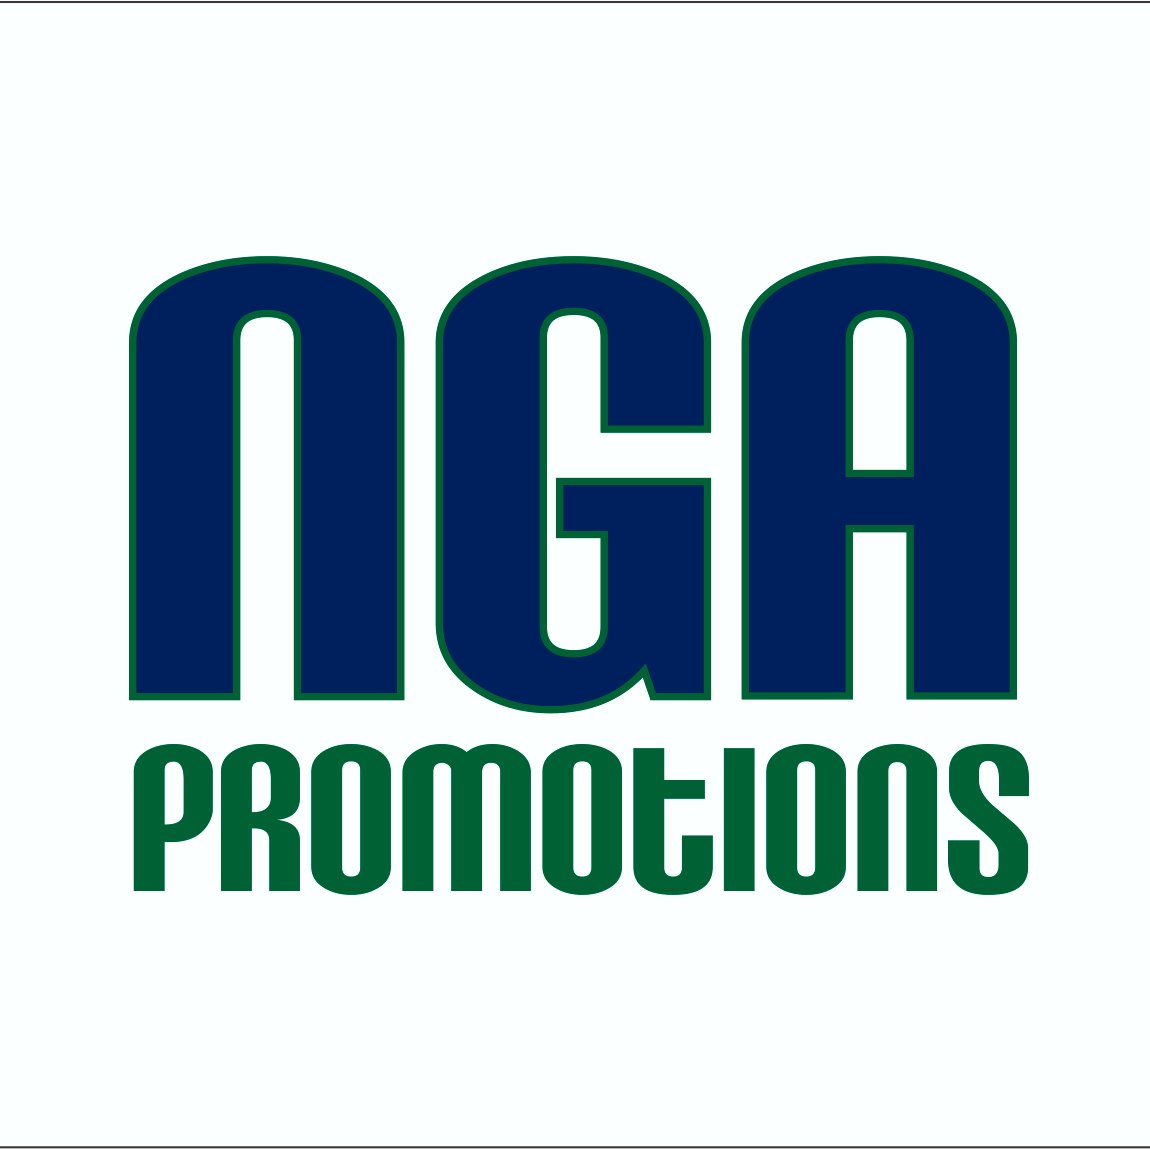 NGA  is a provider of High Quality Embroidered and Screen Printed apparel as well as promotional products for any branding, marketing & communications need.